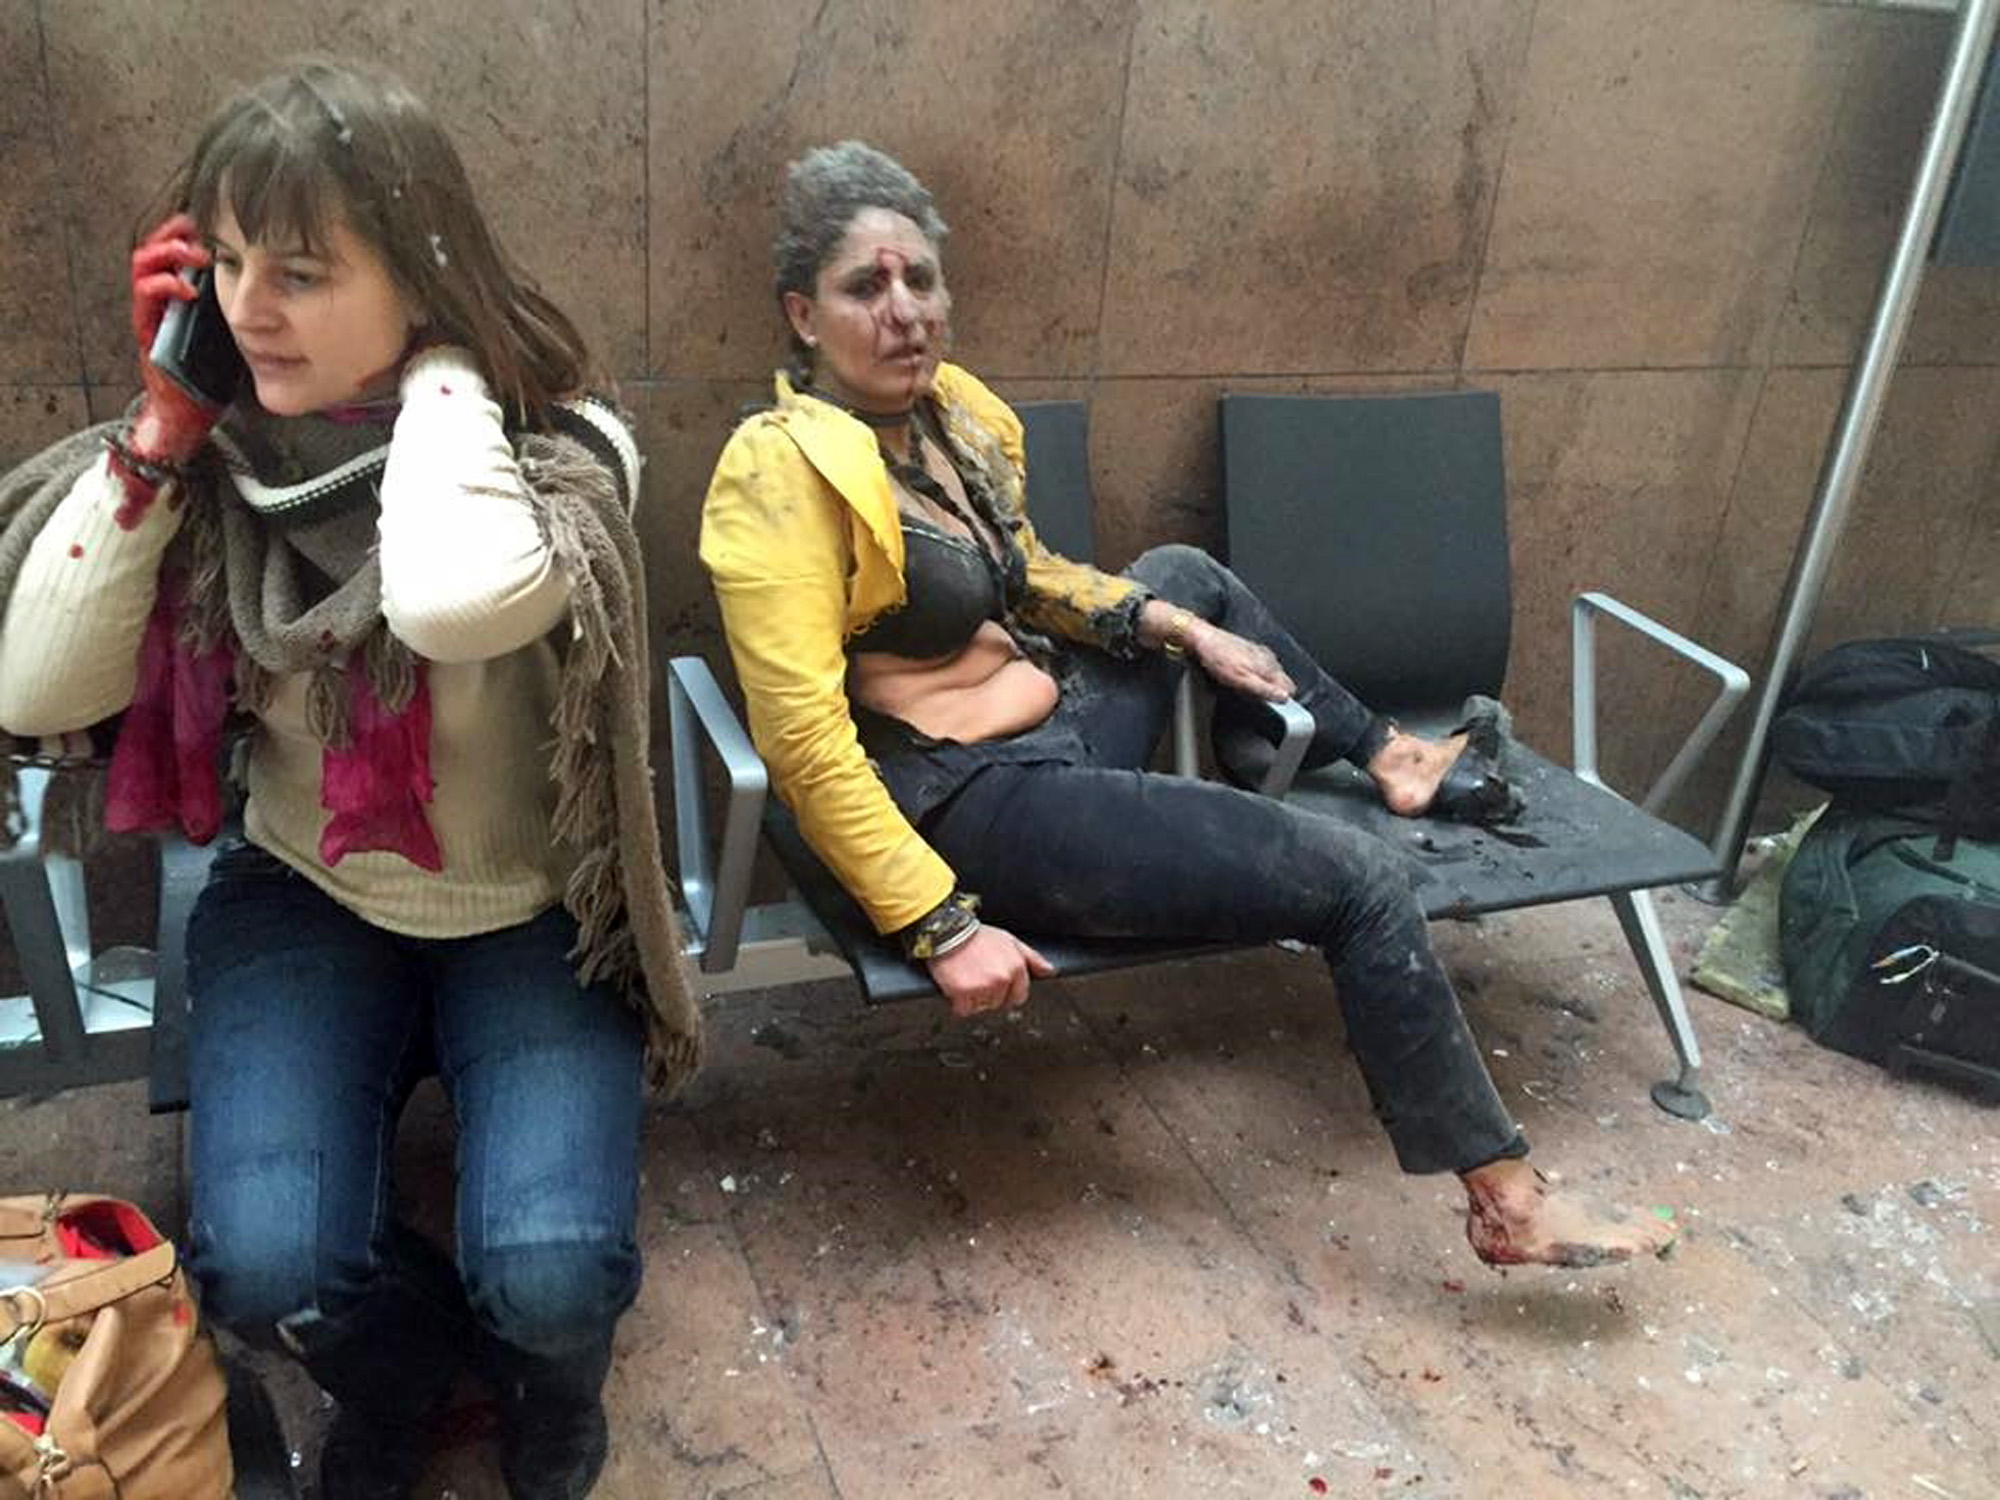 In this photo provided by Georgian Public Broadcaster and photographed by Ketevan Kardava, Nidhi Chaphekar, a 40-year-old Jet Airways flight attendant from Mumbai, right, and another unidentified woman after being wounded in Brussels Airport in Brussels, Belgium, after explosions were heard Tuesday, March 22, 2016. A developing situation left at least one person and possibly more dead in explosions that ripped through the departure hall at Brussels airport Tuesday, police said. All flights were canceled, arriving planes were being diverted and Belgium's terror alert level was raised to maximum, officials said. (Ketevan Kardava/ Georgian Public Broadcaster via AP)